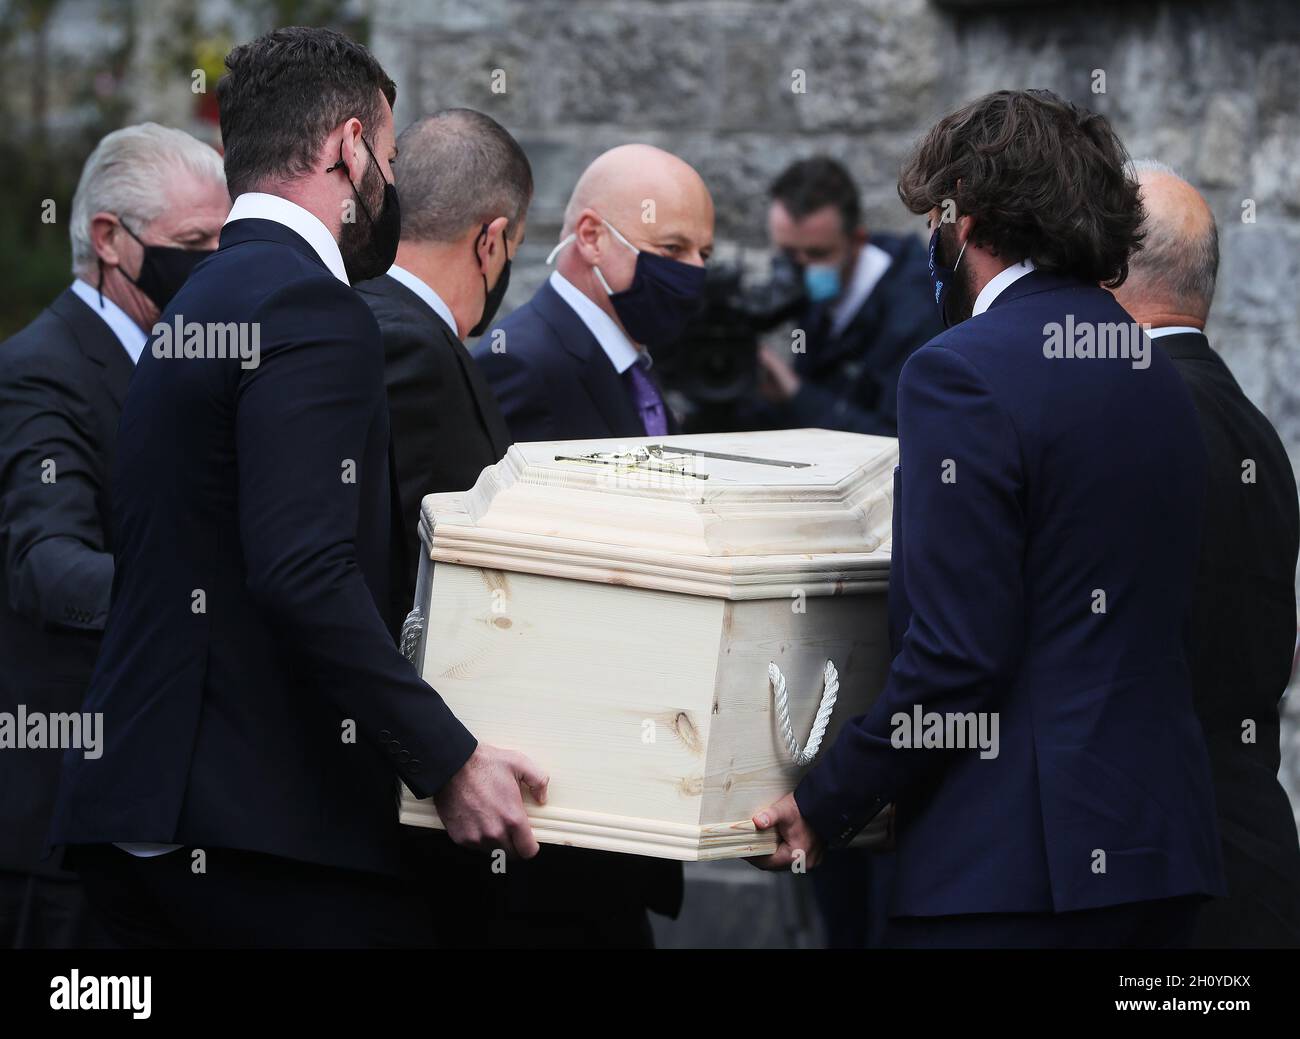 The coffin of Chieftains founder Paddy Moloney arrives at St. Kevin's Church in Glendalough, Co. Wicklow, for his funeral. Picture date: Friday October 15, 2021. Paddy Moloney lived for music, mourners at his funeral were told. The Dublin musician, who played a key role in the revival of traditional Irish folk music, died this week aged 83. Stock Photo